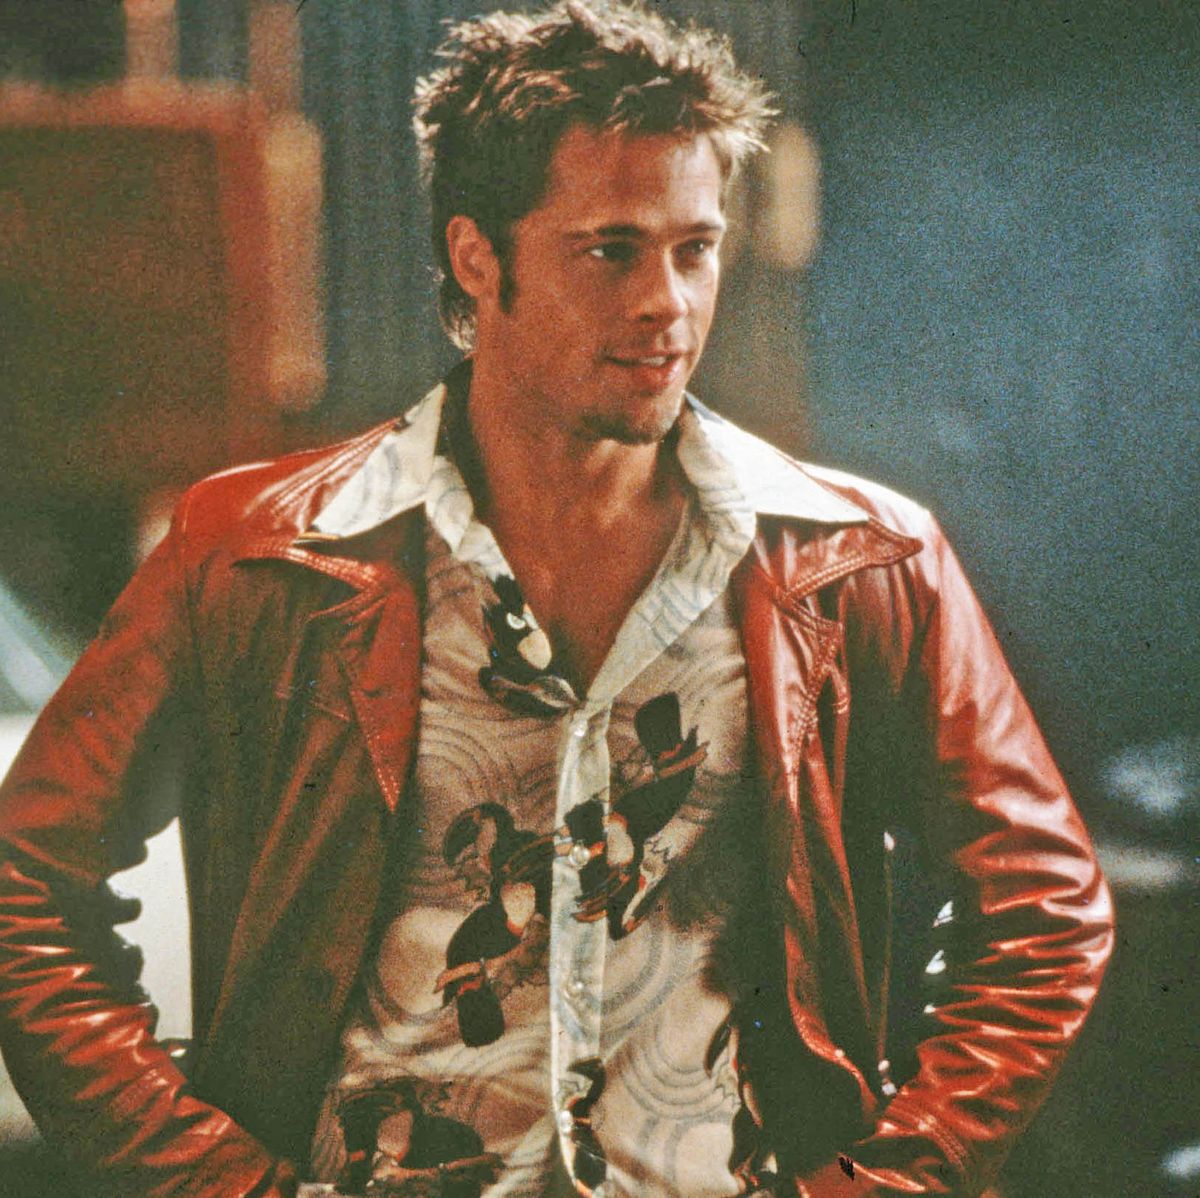 Brad Pitt's Fight Club Jacket Was the Movie's Only Good Character